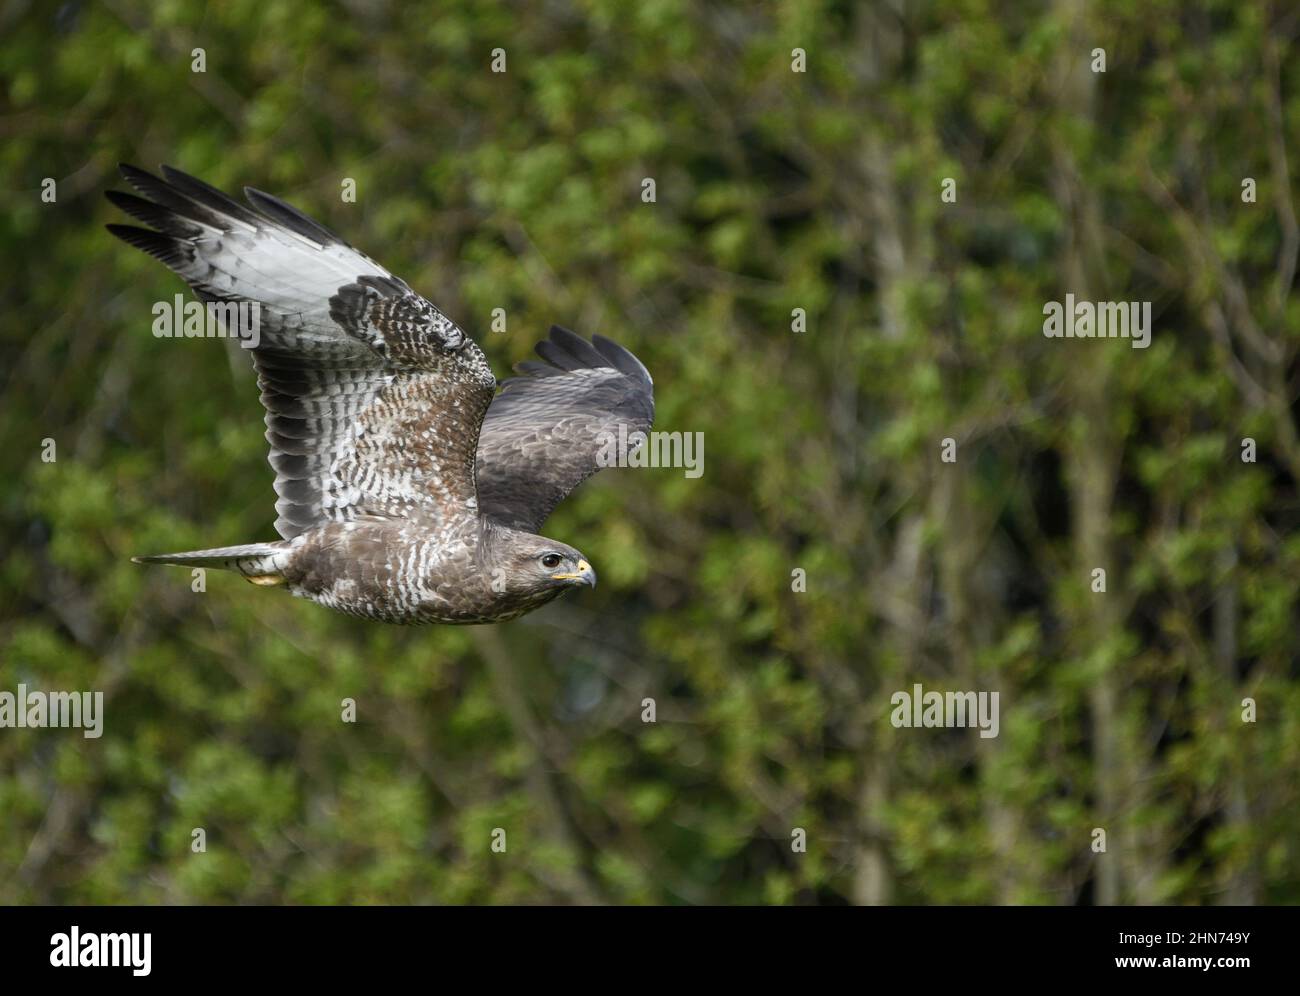 Buzzard in flight with the forest in the background Stock Photo